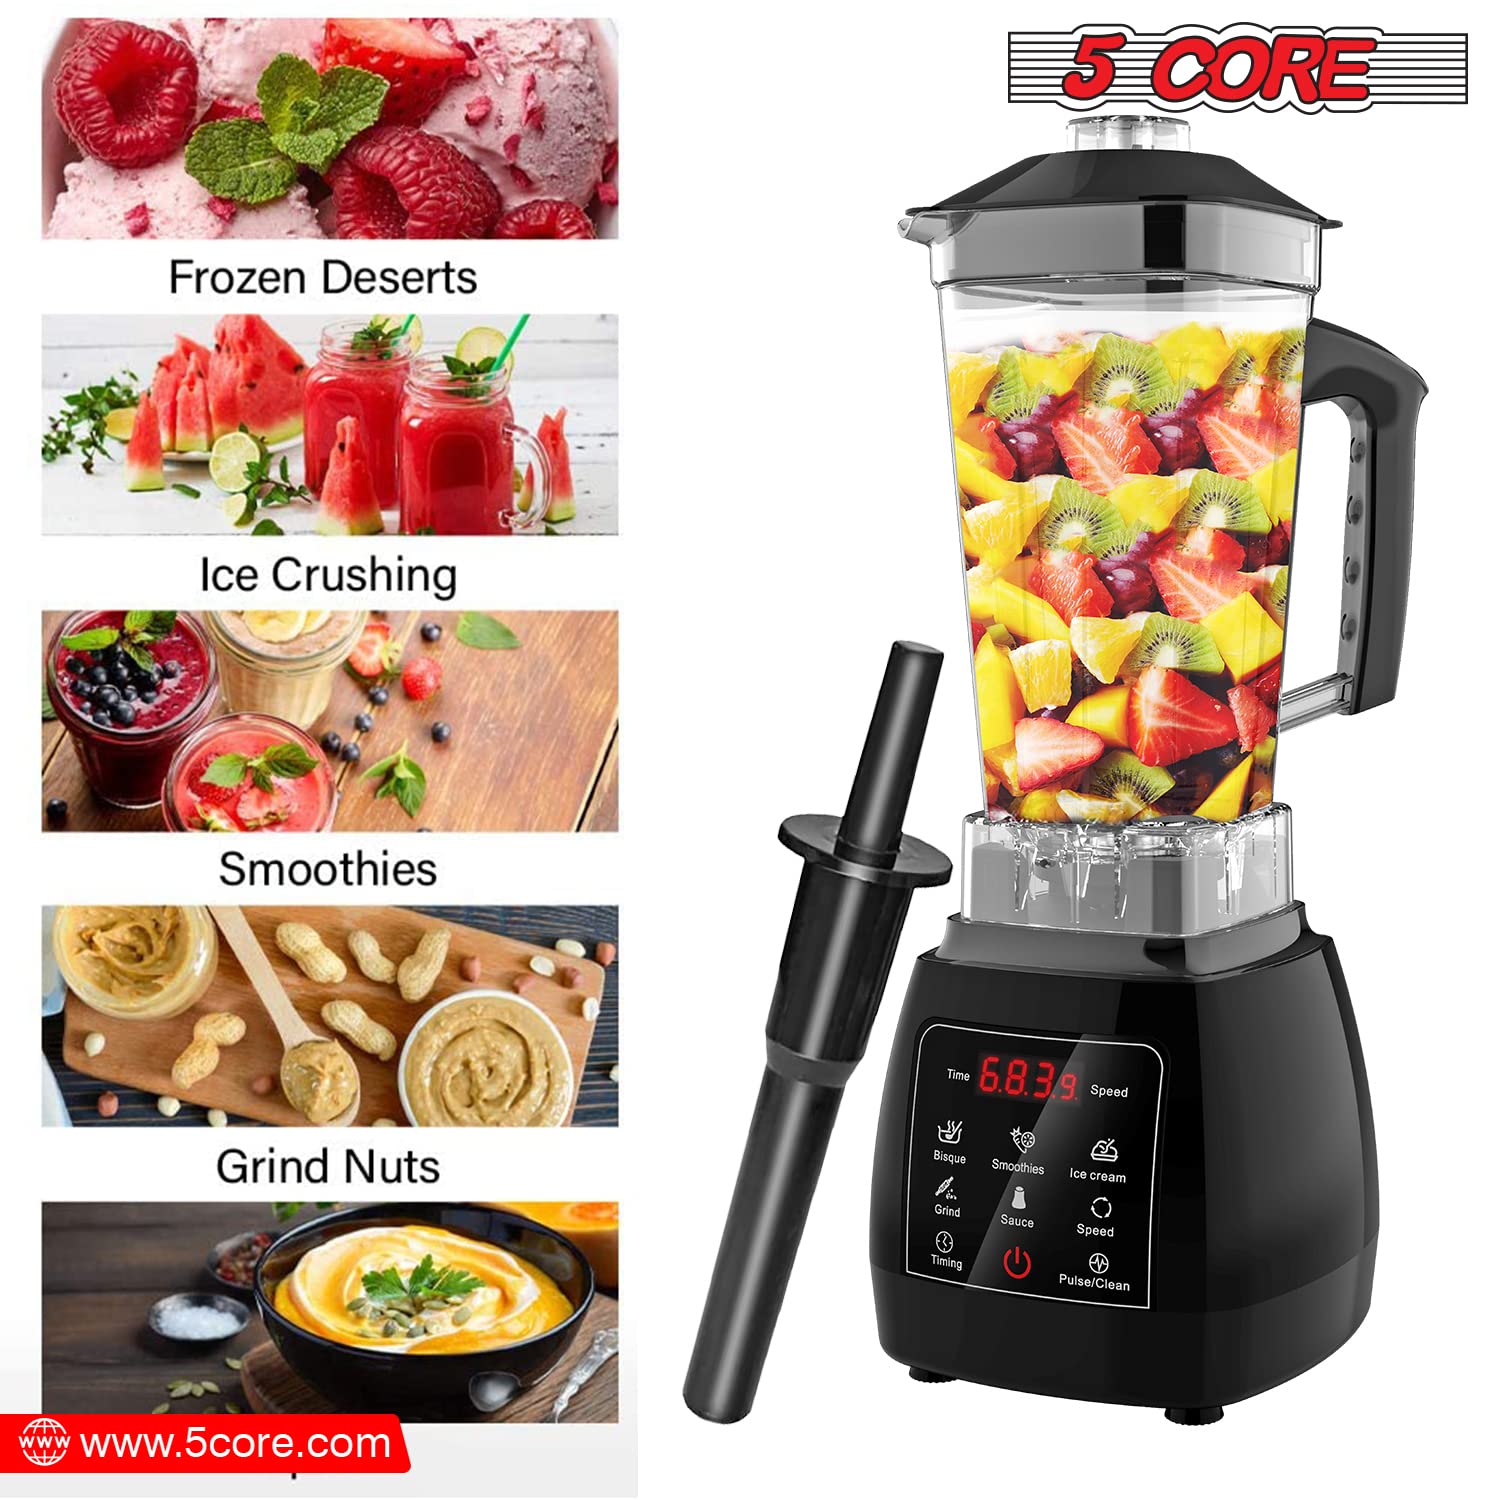 5 Core 2L Professional Countertop Blender Touch Screen For Kitchen 68 Oz 2000W High Speed BPA Free 6 Titanium Blade Smoothie Blender Electric For Soup Shake Juice Multi-Speed Digital JB 2000 D